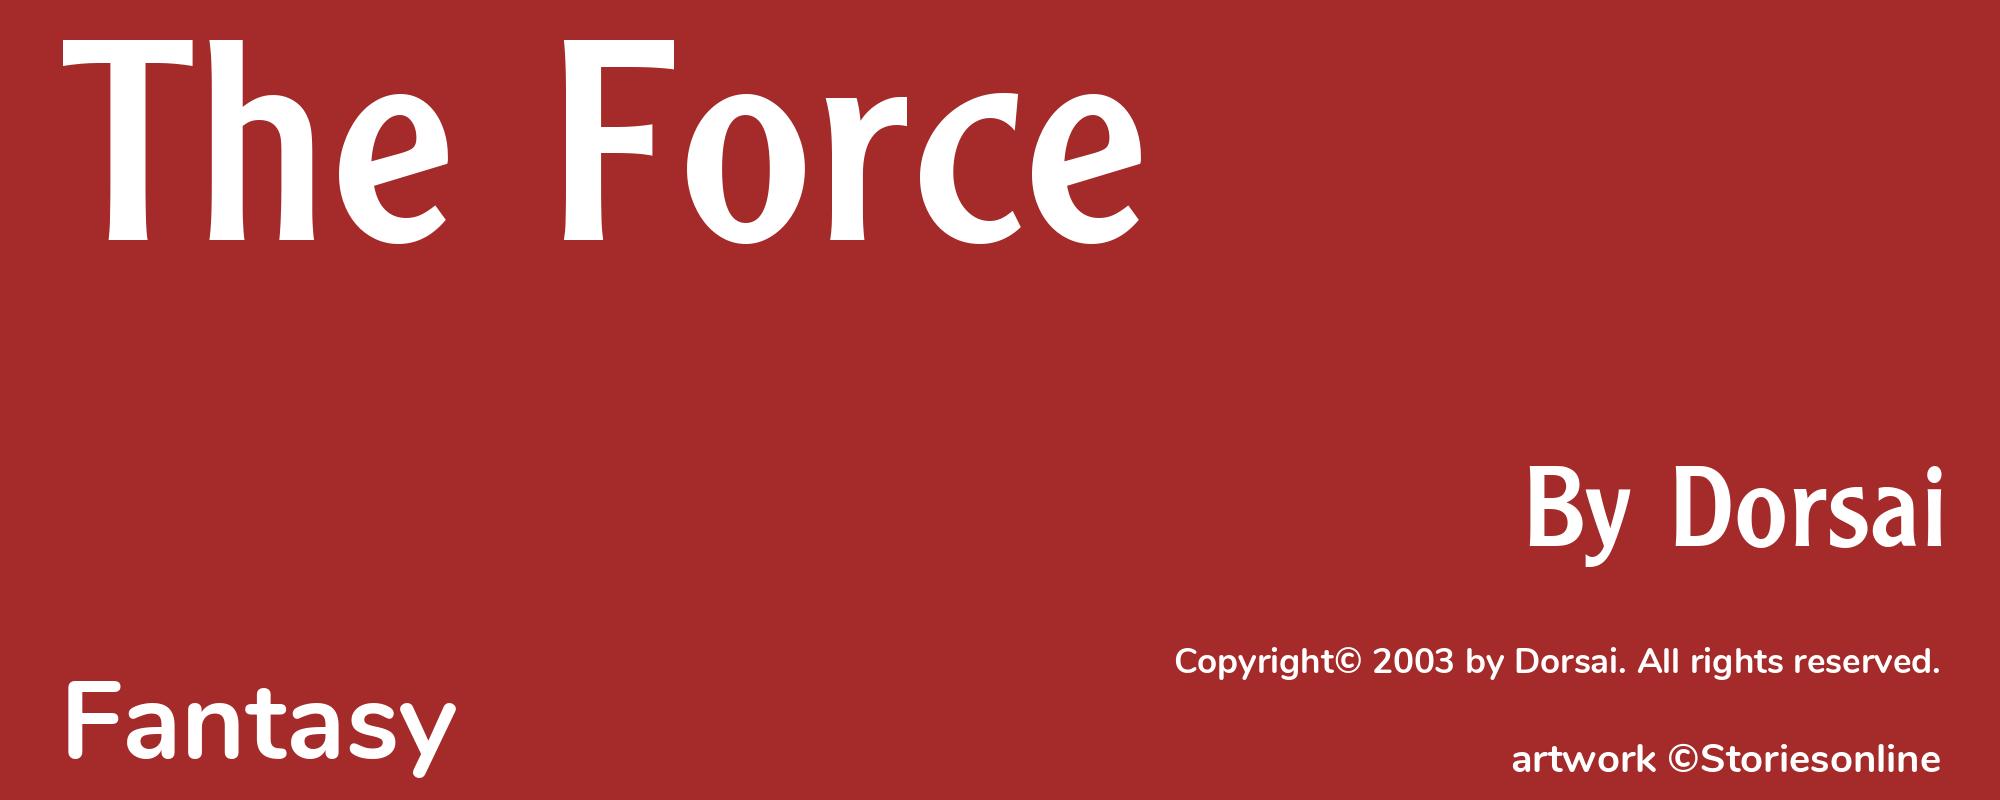 The Force - Cover